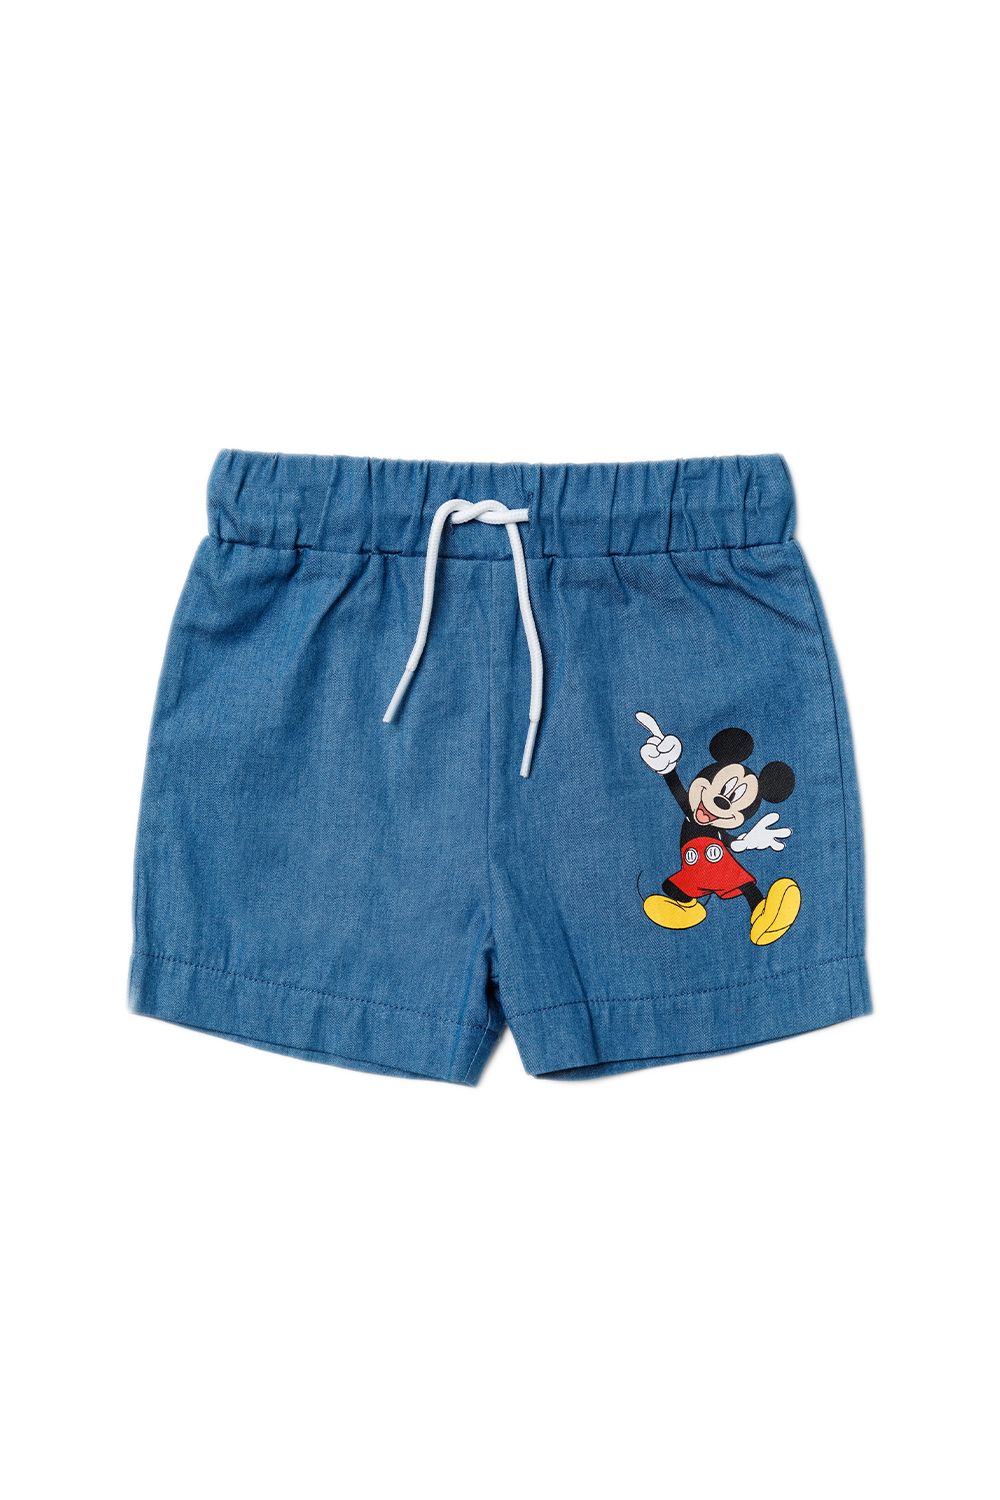 This adorable Disney Baby two-piece set features a classic Mickey Mouse print. The set includes a srtipey t-shirt and chambray style, drawstring shorts. Both the t-shirt and dungarees are cotton, keeping your little one comfortable. This set would make a lovely gift, or a new addition to your little ones wardrobe!